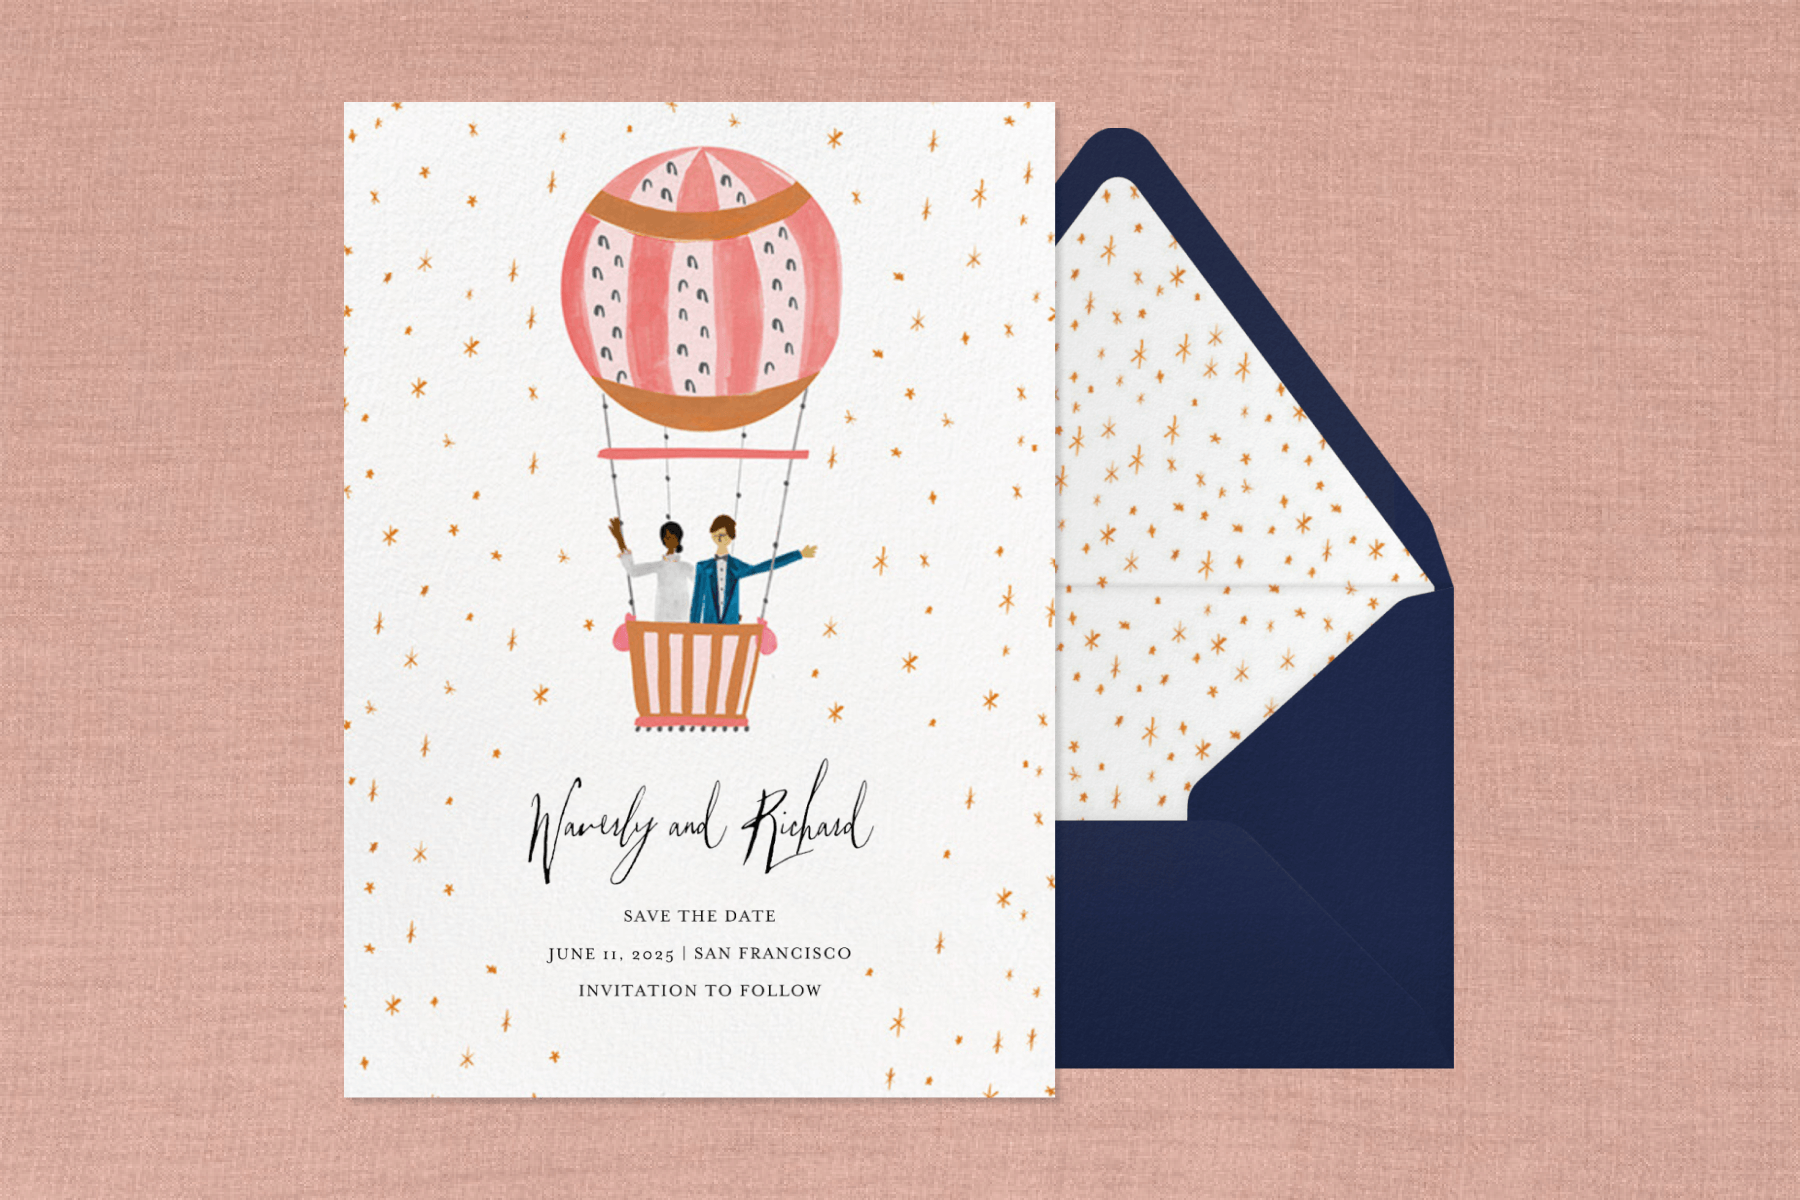 A save the date with two people in a hot air balloon in the stars and a matching navy envelope.